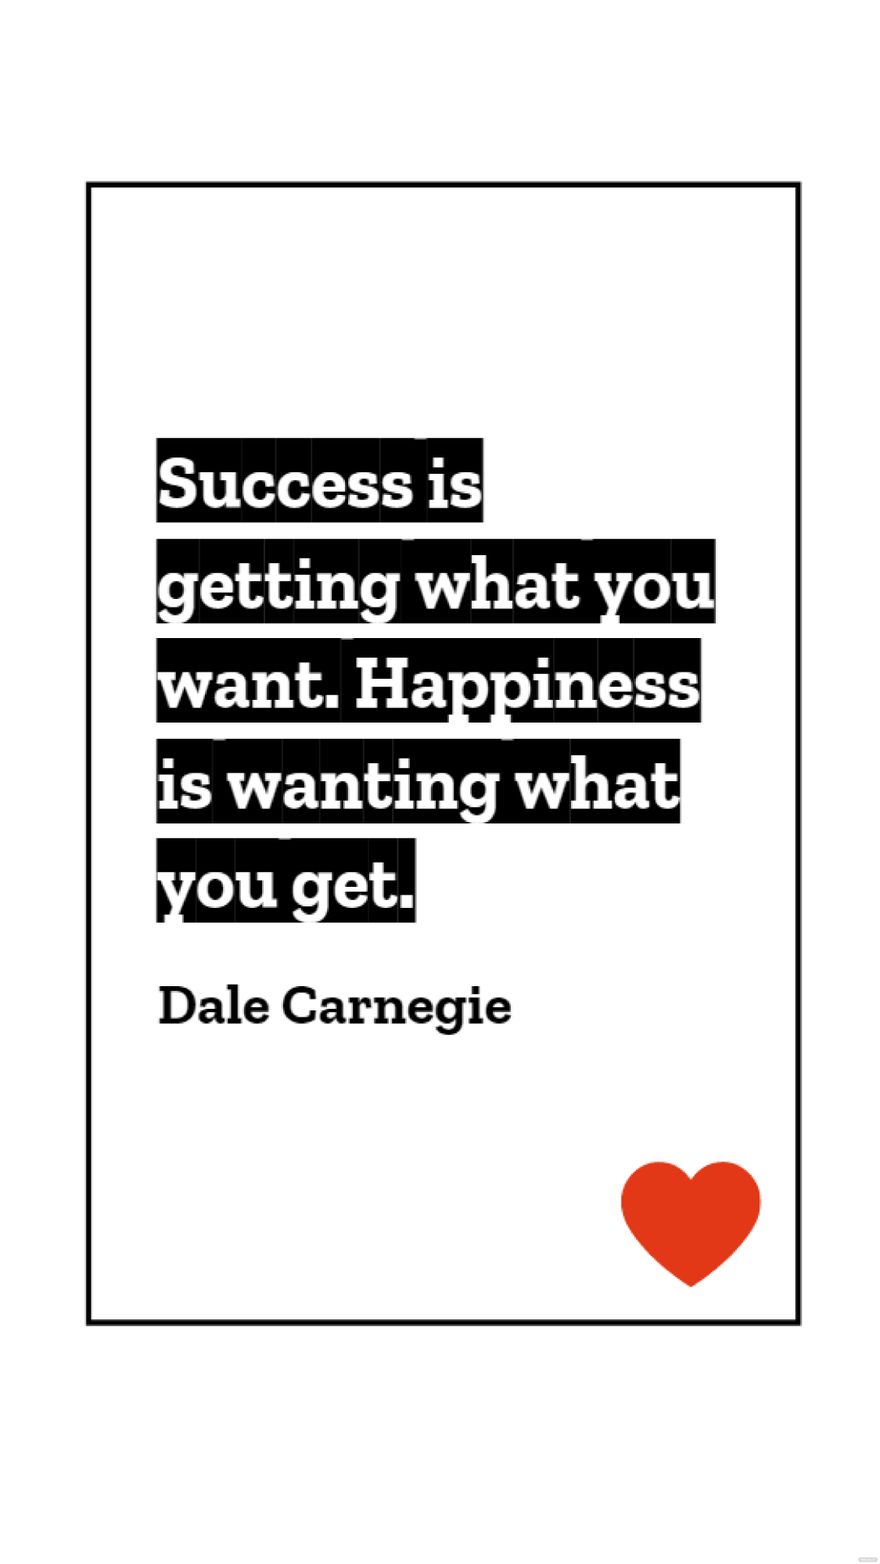 Dale Carnegie - Success is getting what you want. Happiness is wanting what you get.